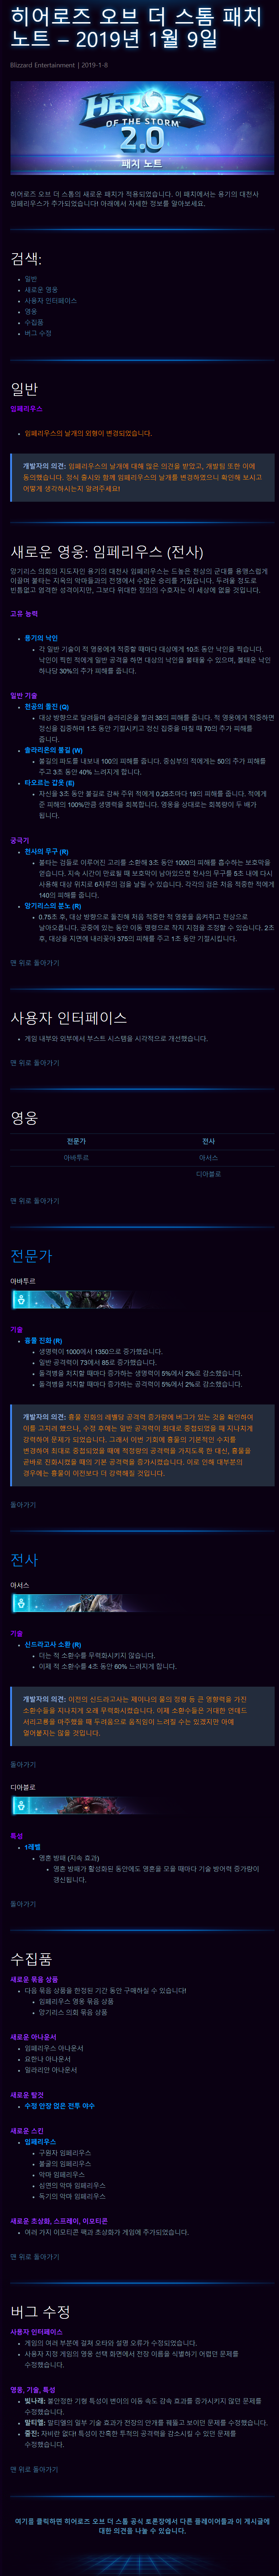 42.0_PatchNote_KR.png